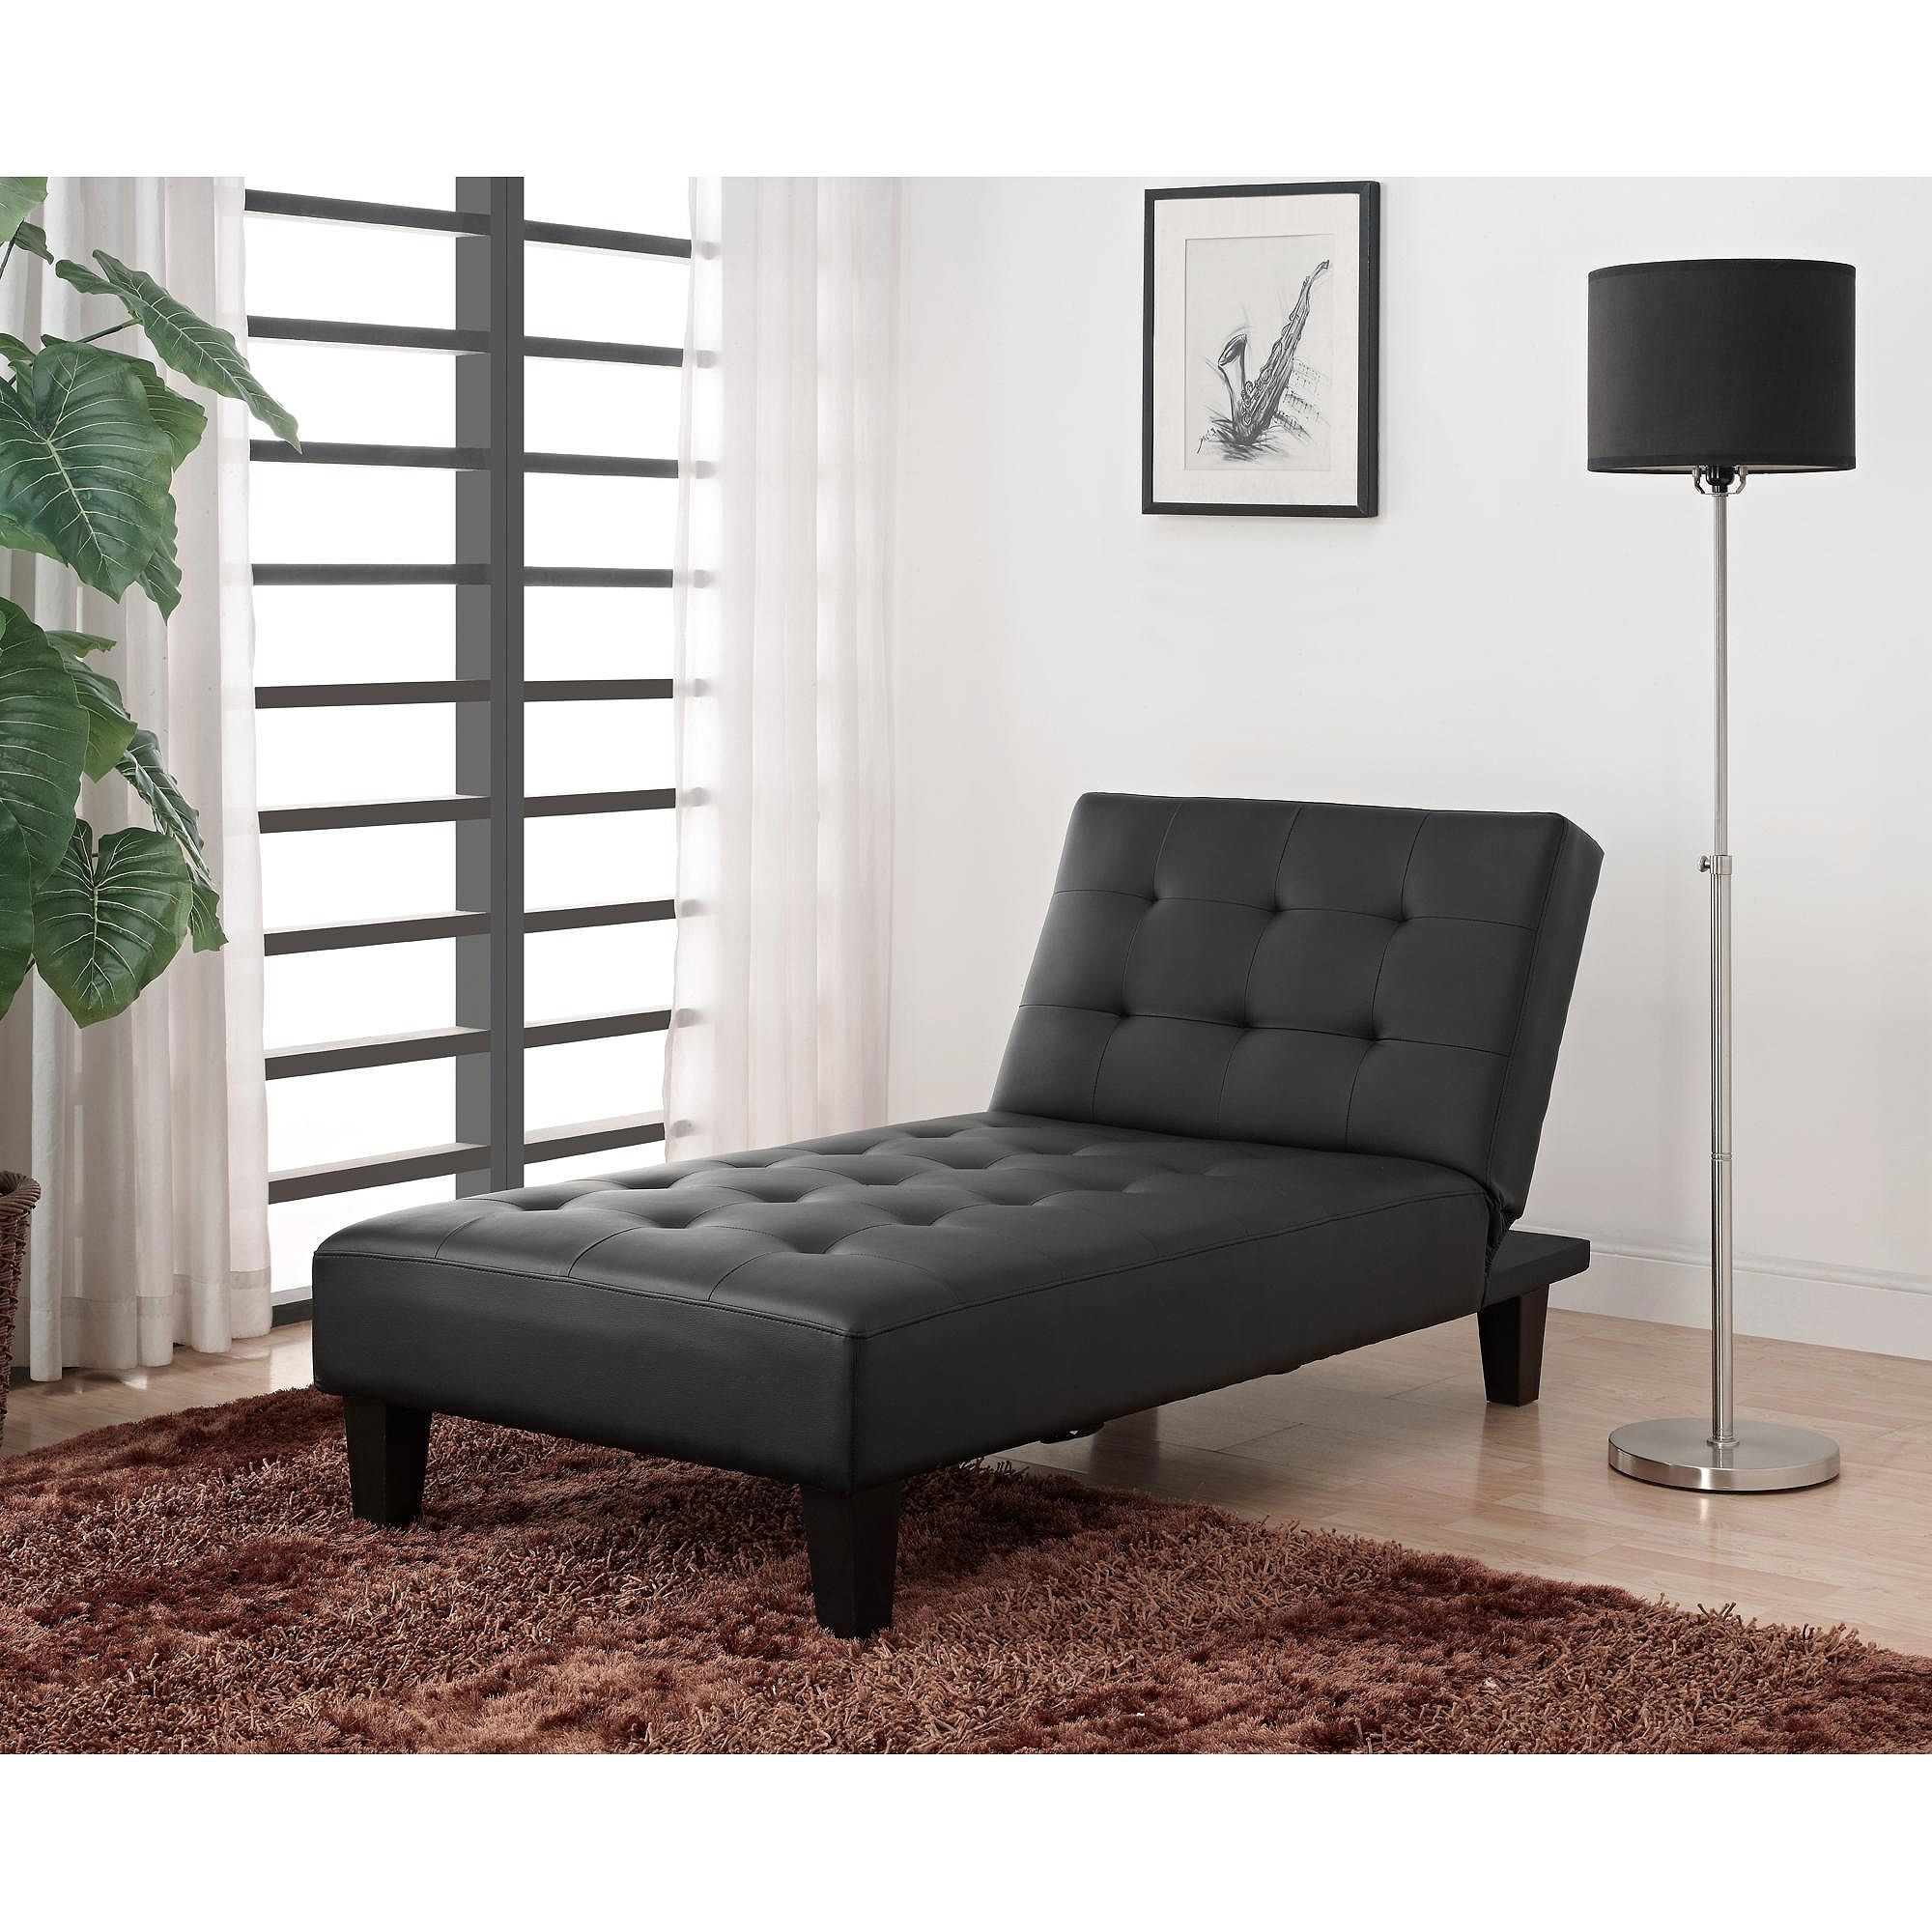 Emily Futon Chaise Loungers Pertaining To Best And Newest Futon Chaise Lounger – Bm Furnititure (View 8 of 15)